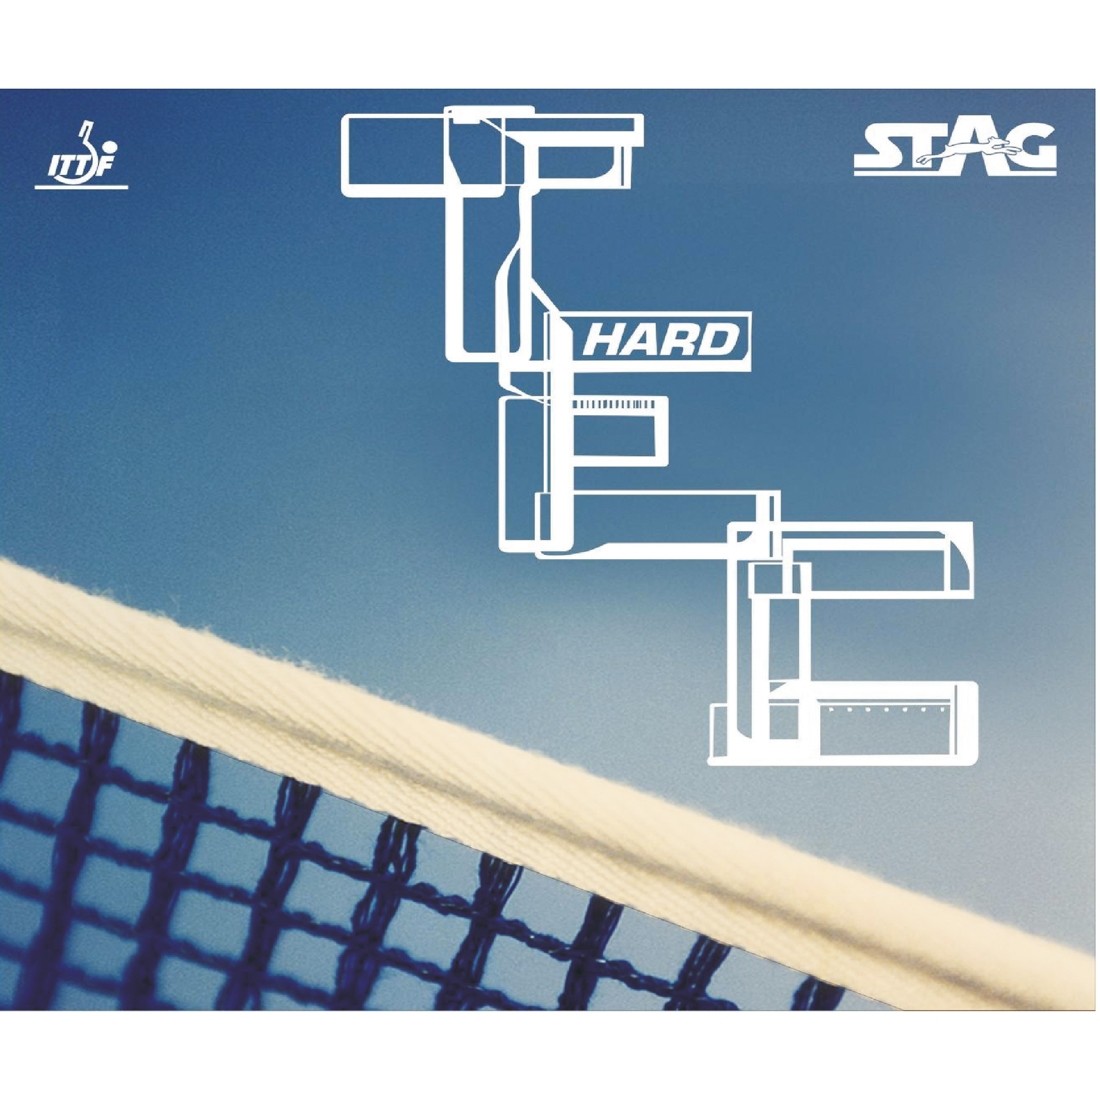 STAG TT RUBBER TEC SOFT 1.8MM RED